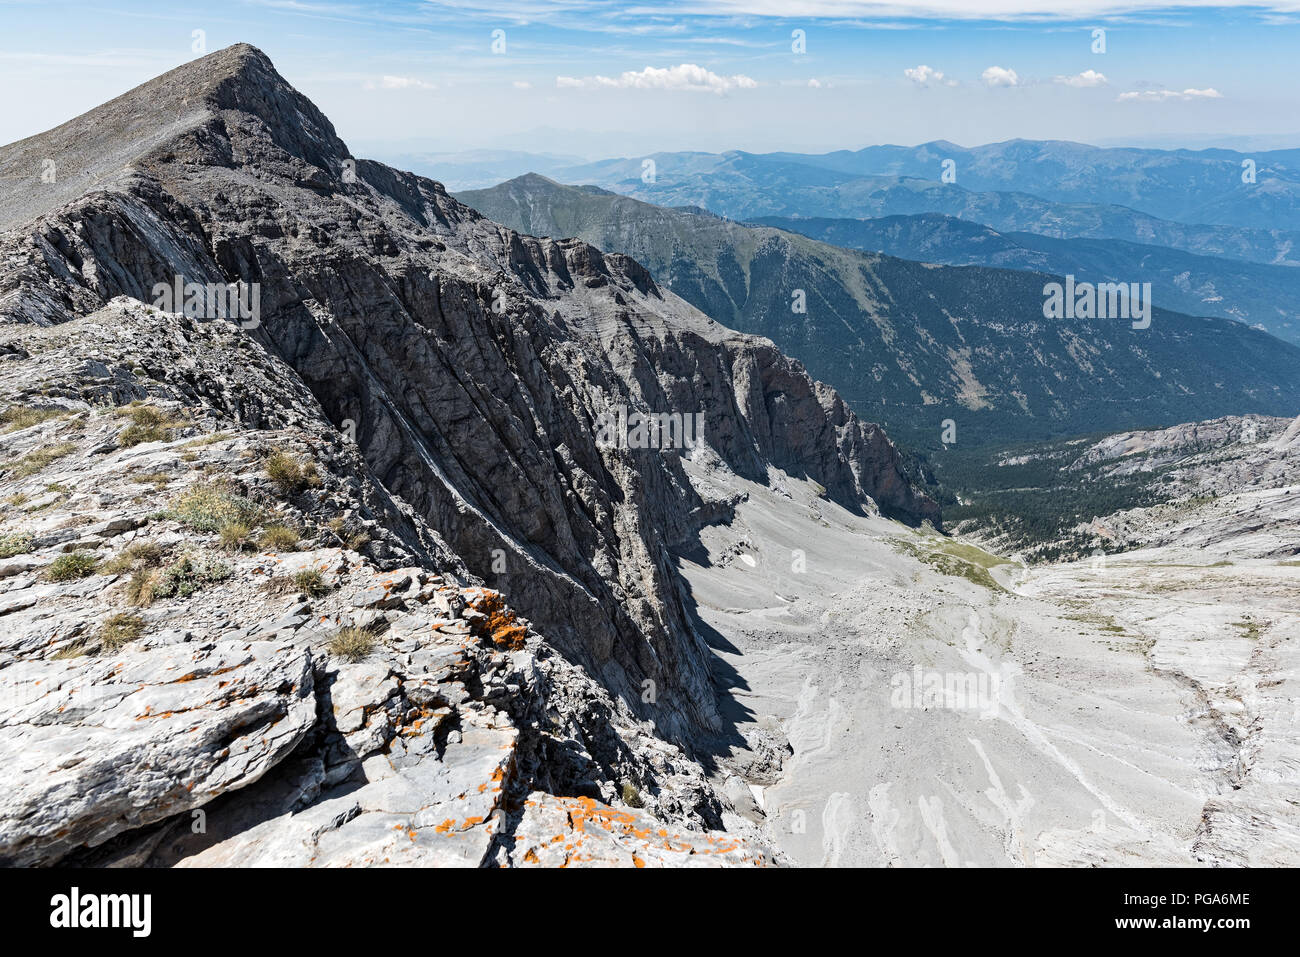 View of Skolio, one of the highest peaks of Mount Olympus in Greece, home of the ancient Greek gods Stock Photo